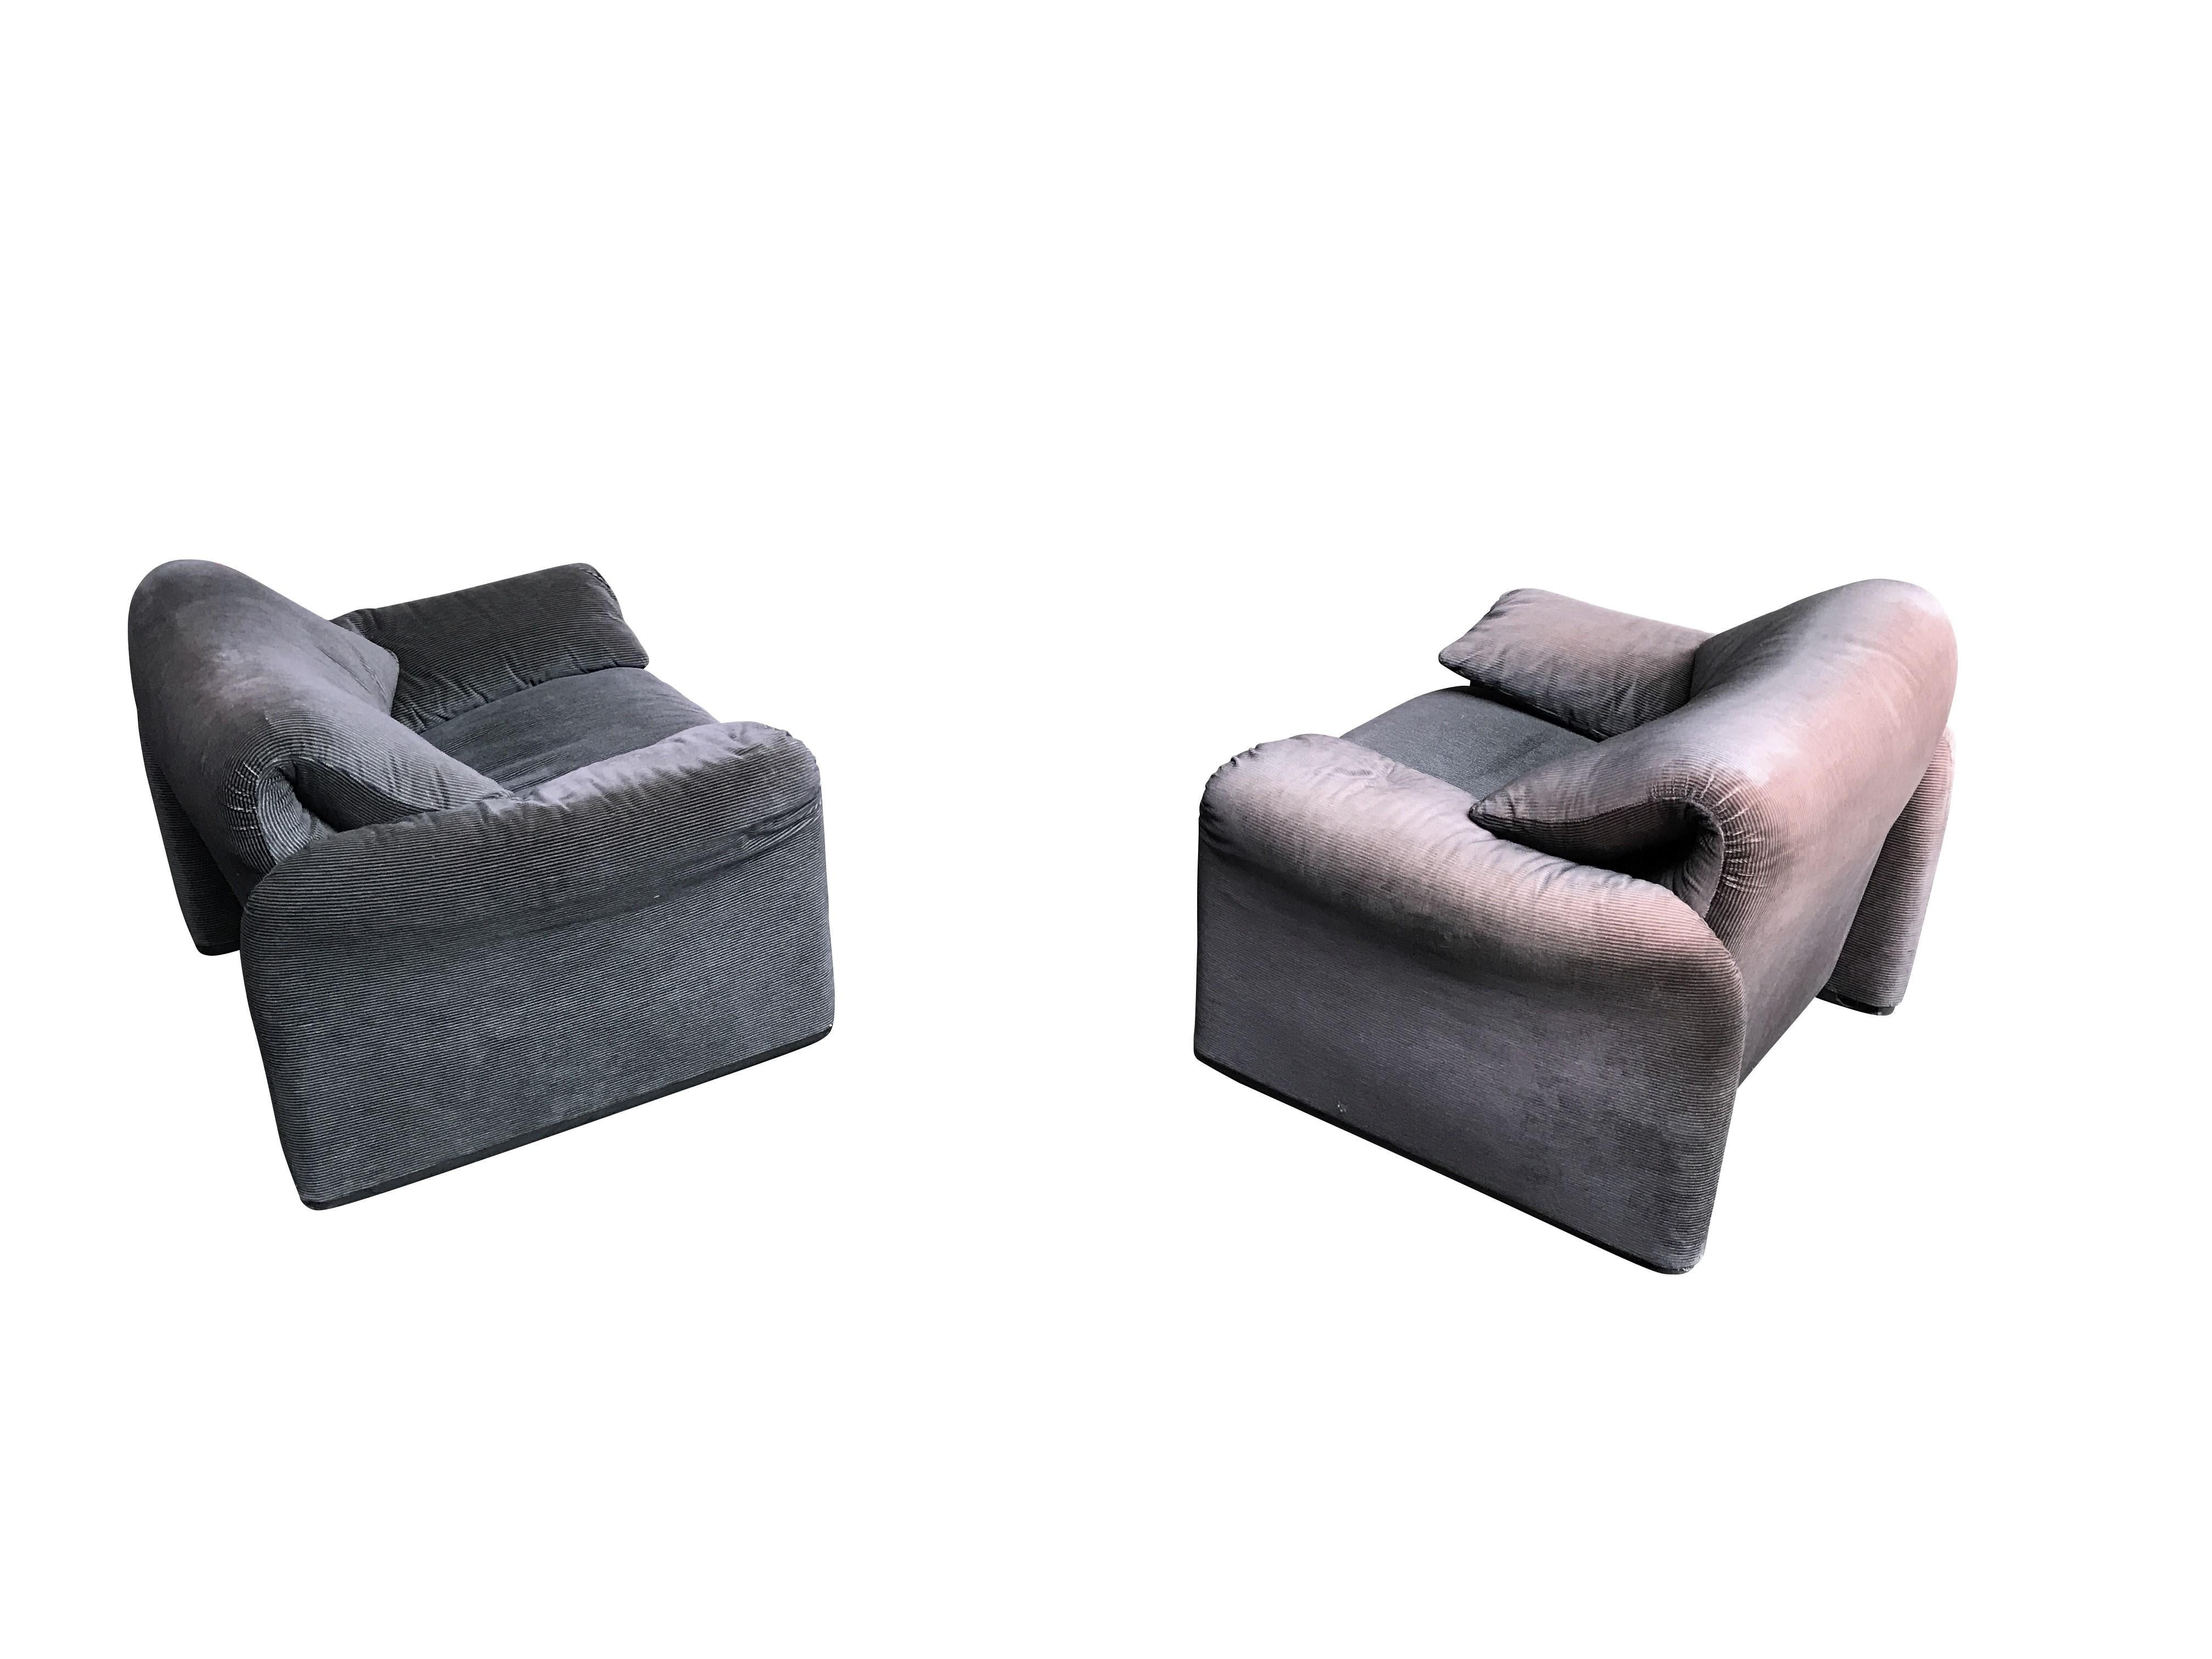 Italian Maralunga Armchairs by Vico Magistretti for Cassina, 1973, Set of Two